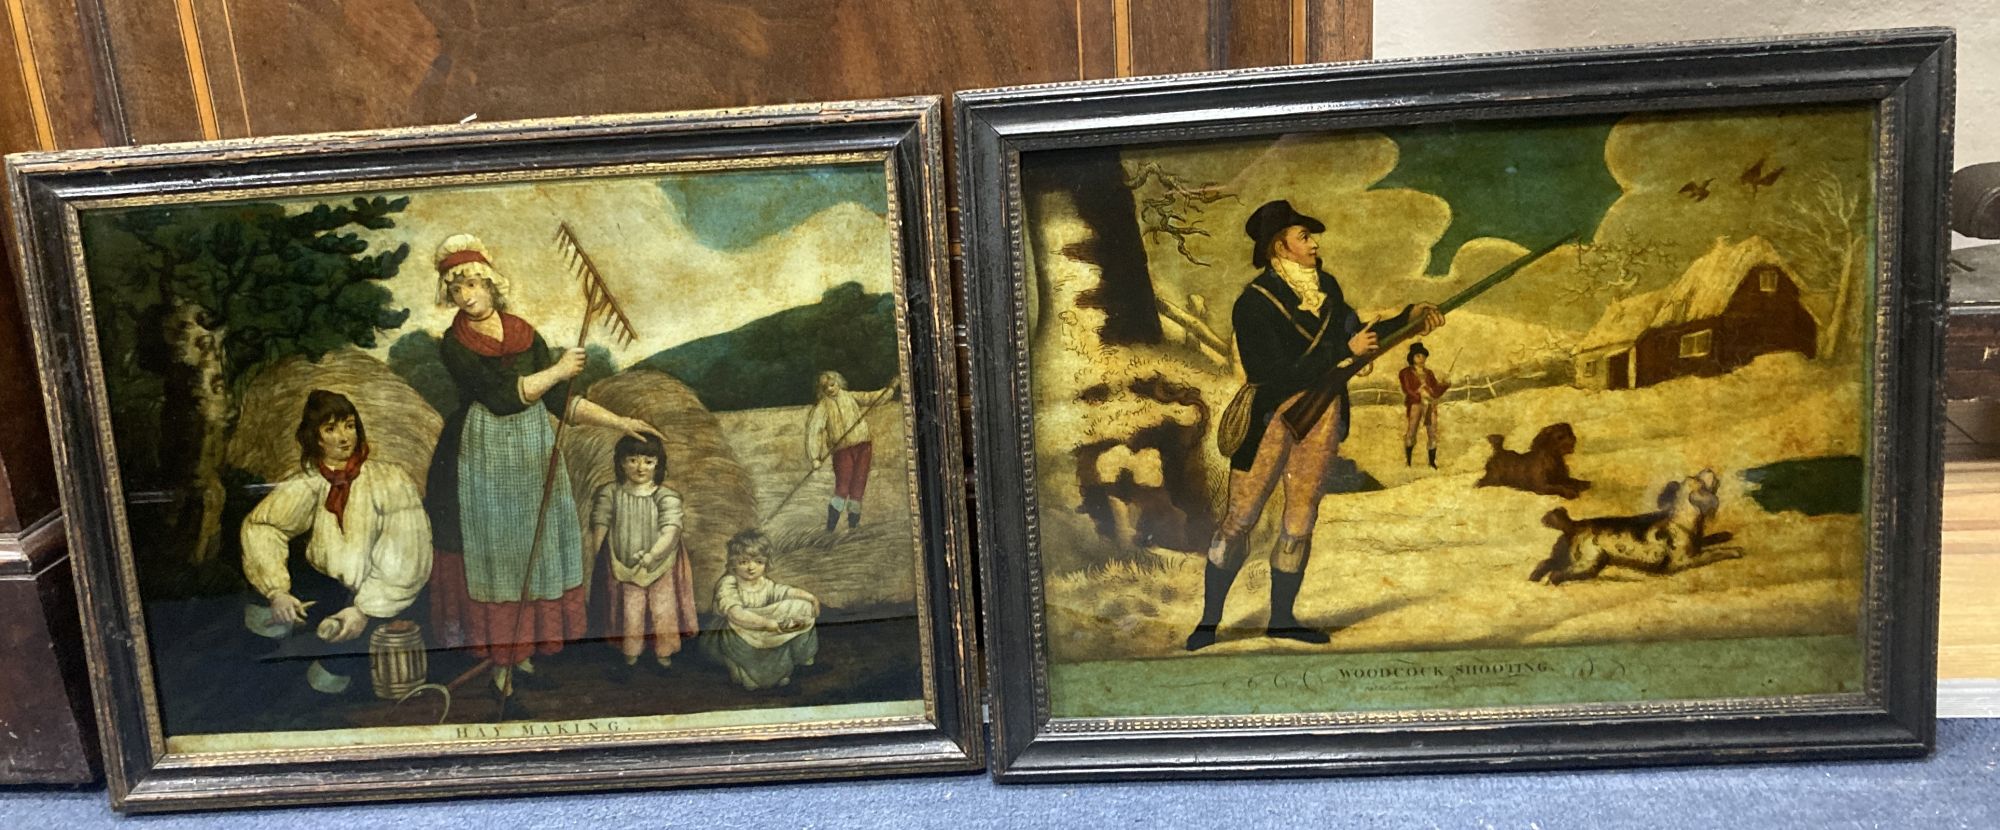 Two early 19th century coloured reverse glass prints, Woodcock Shooting, dated 1804, and Hay Making, both 25 x 35cm